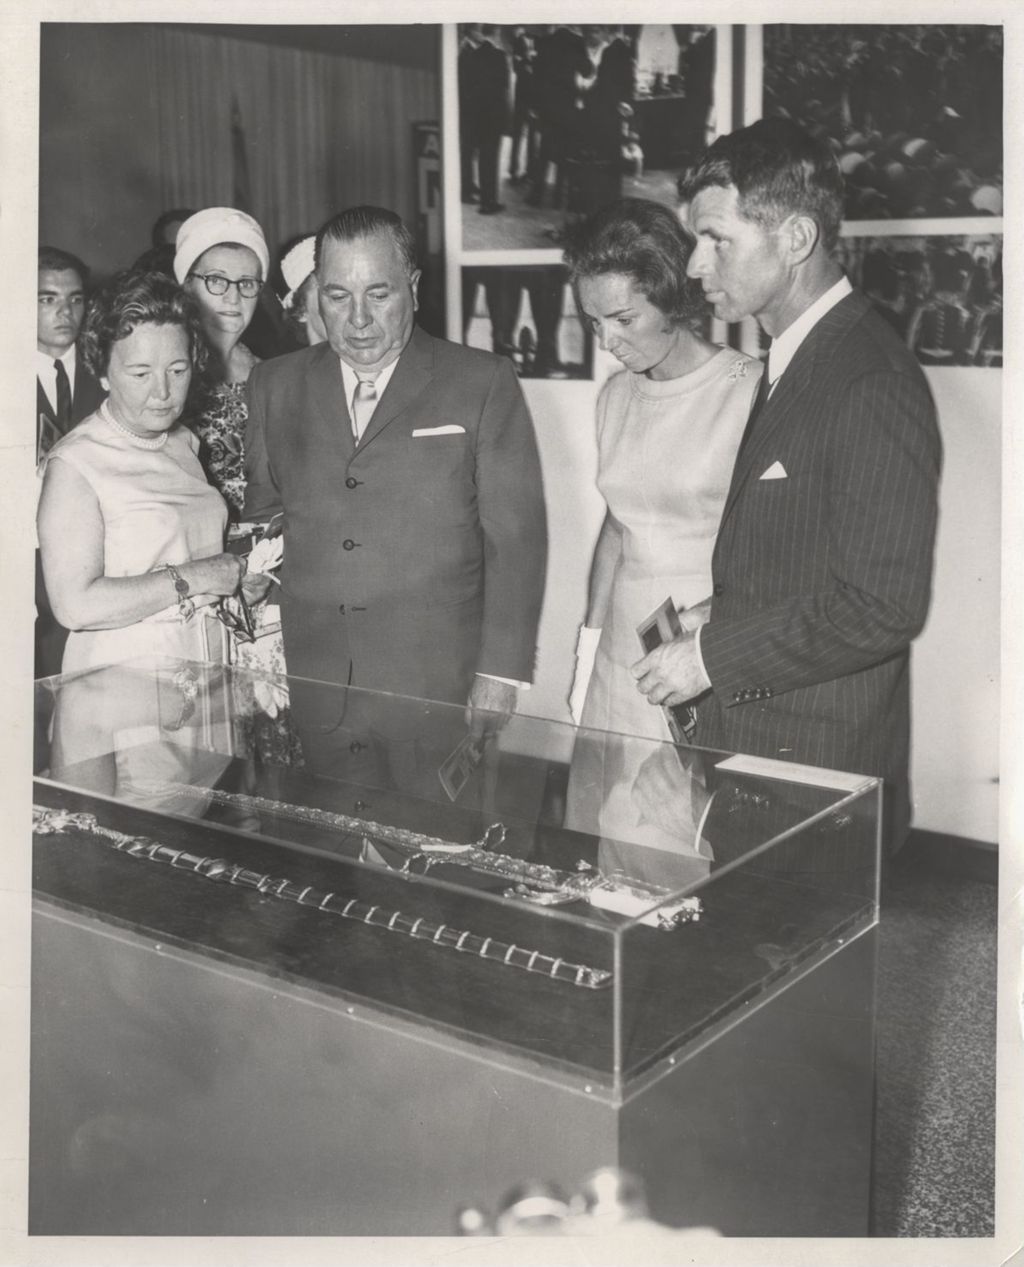 Ethel and Robert Kennedy with Eleanor and Richard J. Daley at an exhibition